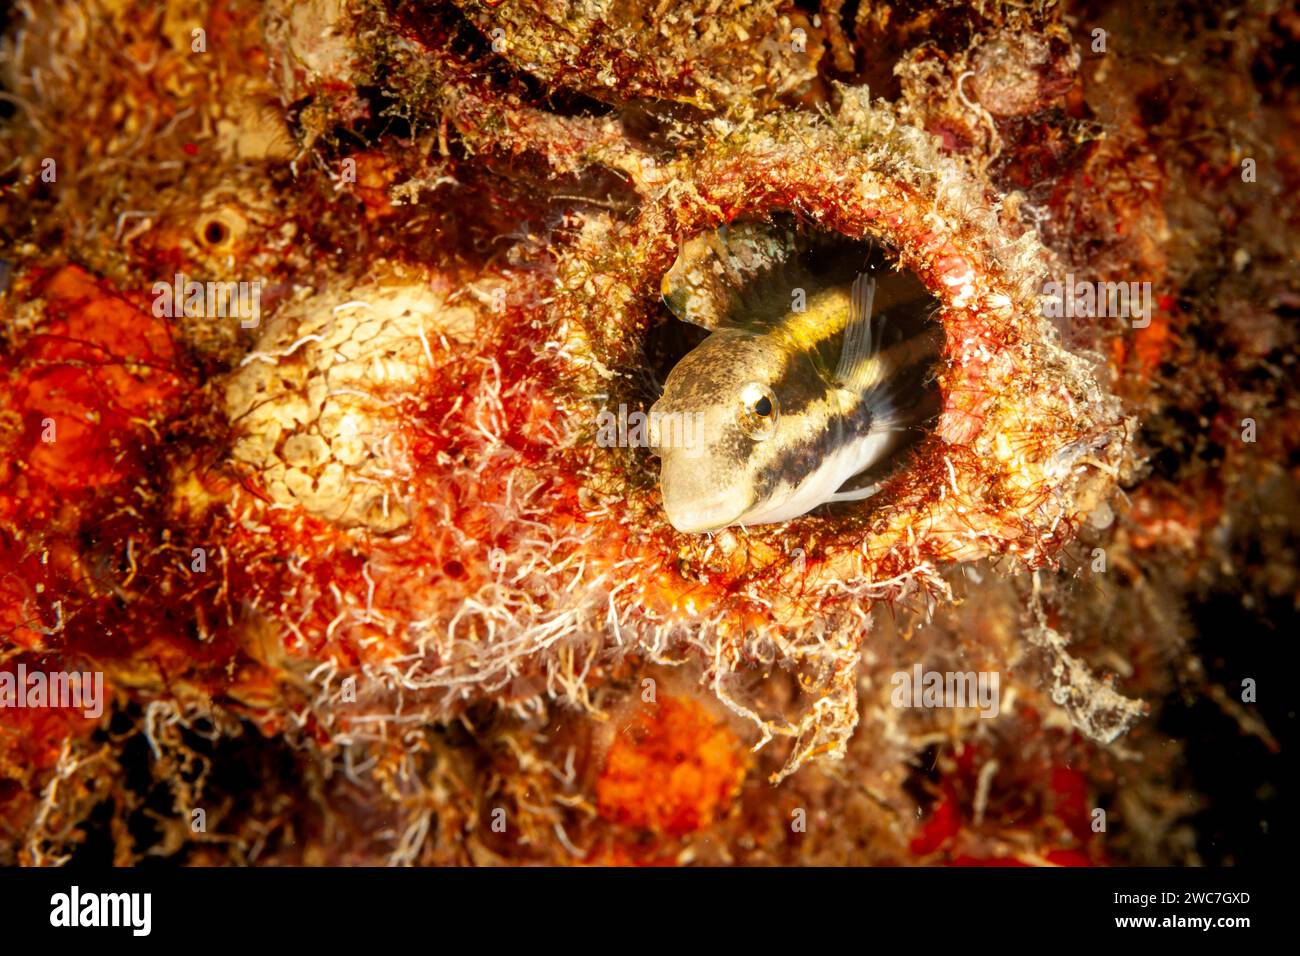 Malaysia, Sabah, Kapalai, A striped poison fang blenny (Meiacanthus grammistes) in its den Stock Photo